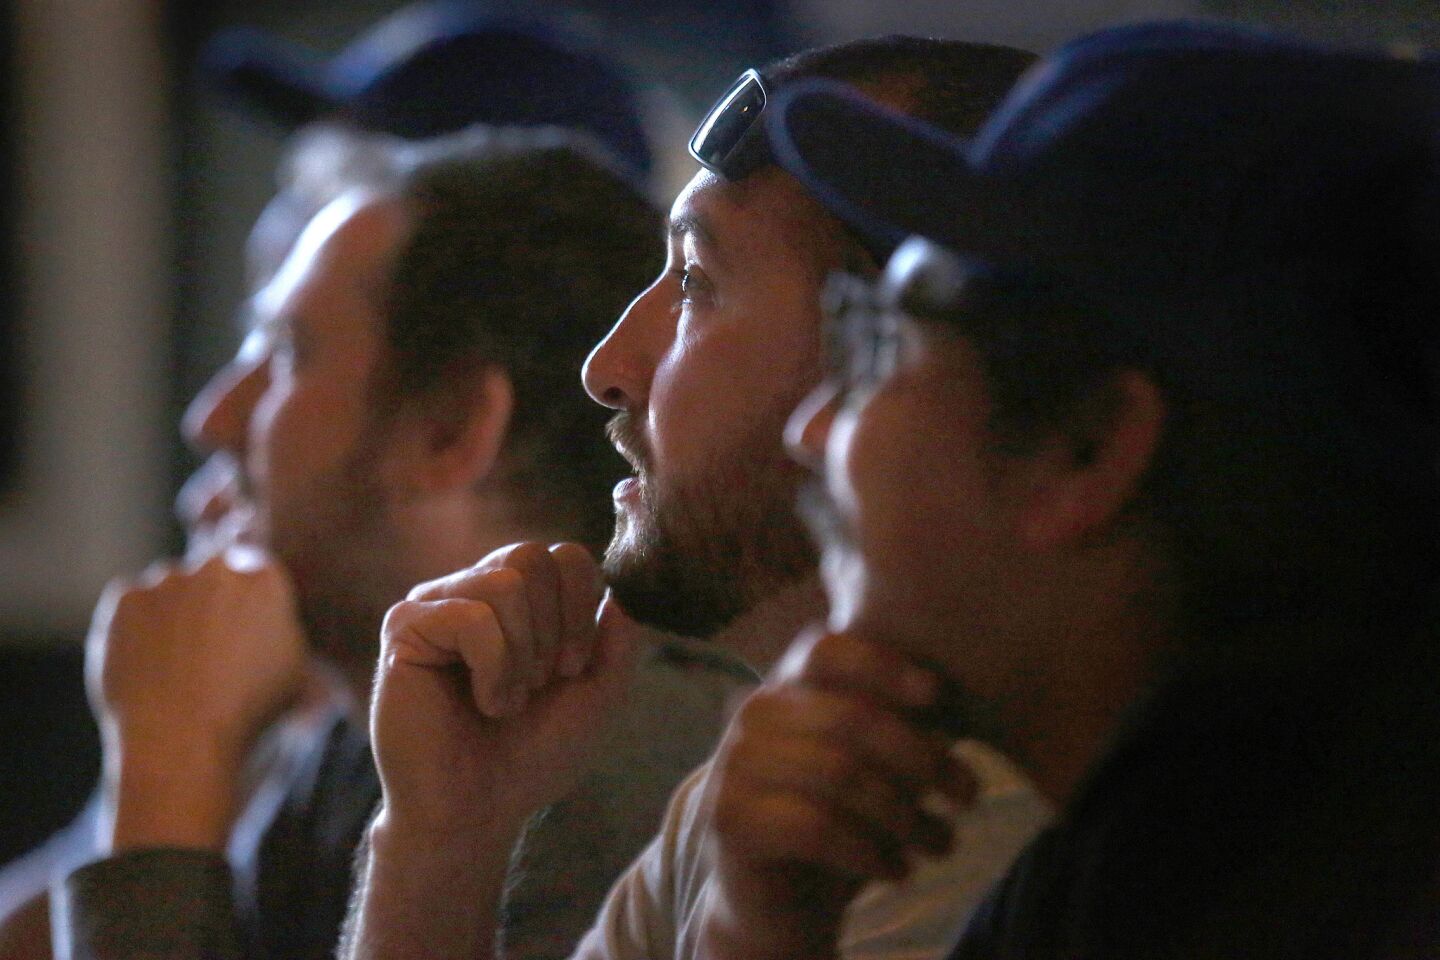 Geroge Montejano, 33, of South Pasadena, center, watches the game at the Greyhound Bar & Grill.